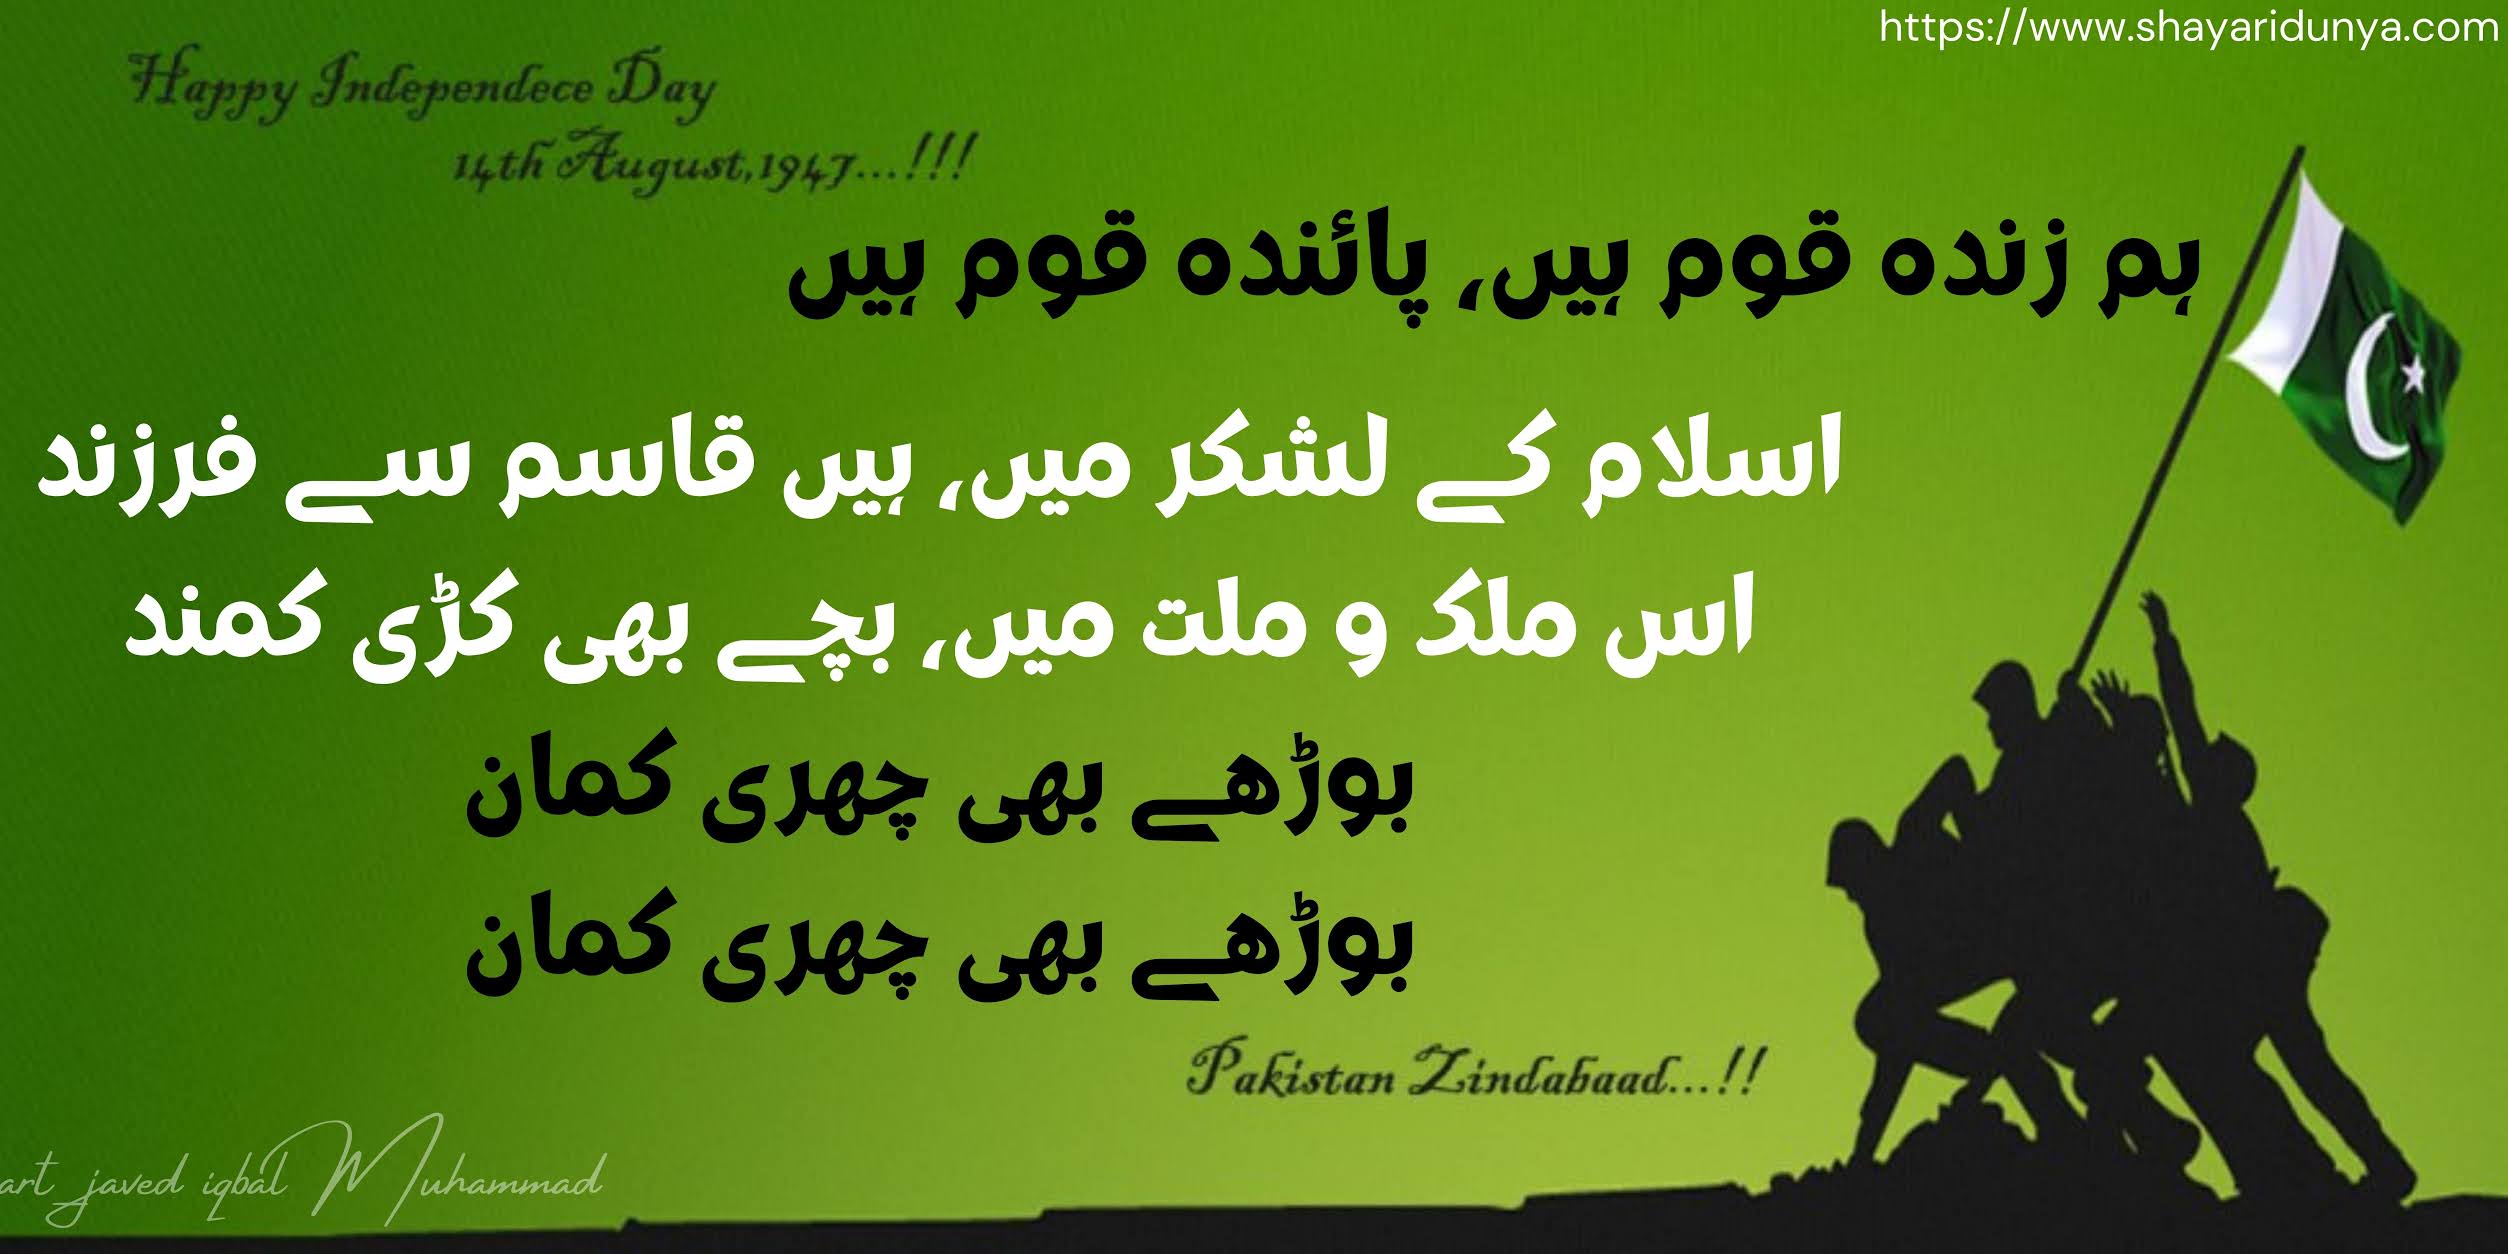 Happy Independence Day 14 August 1947 |14 August Urdu Poetry | Jashan-e-Azadi Shayari | Pakistan Independence Day Pictures 2021